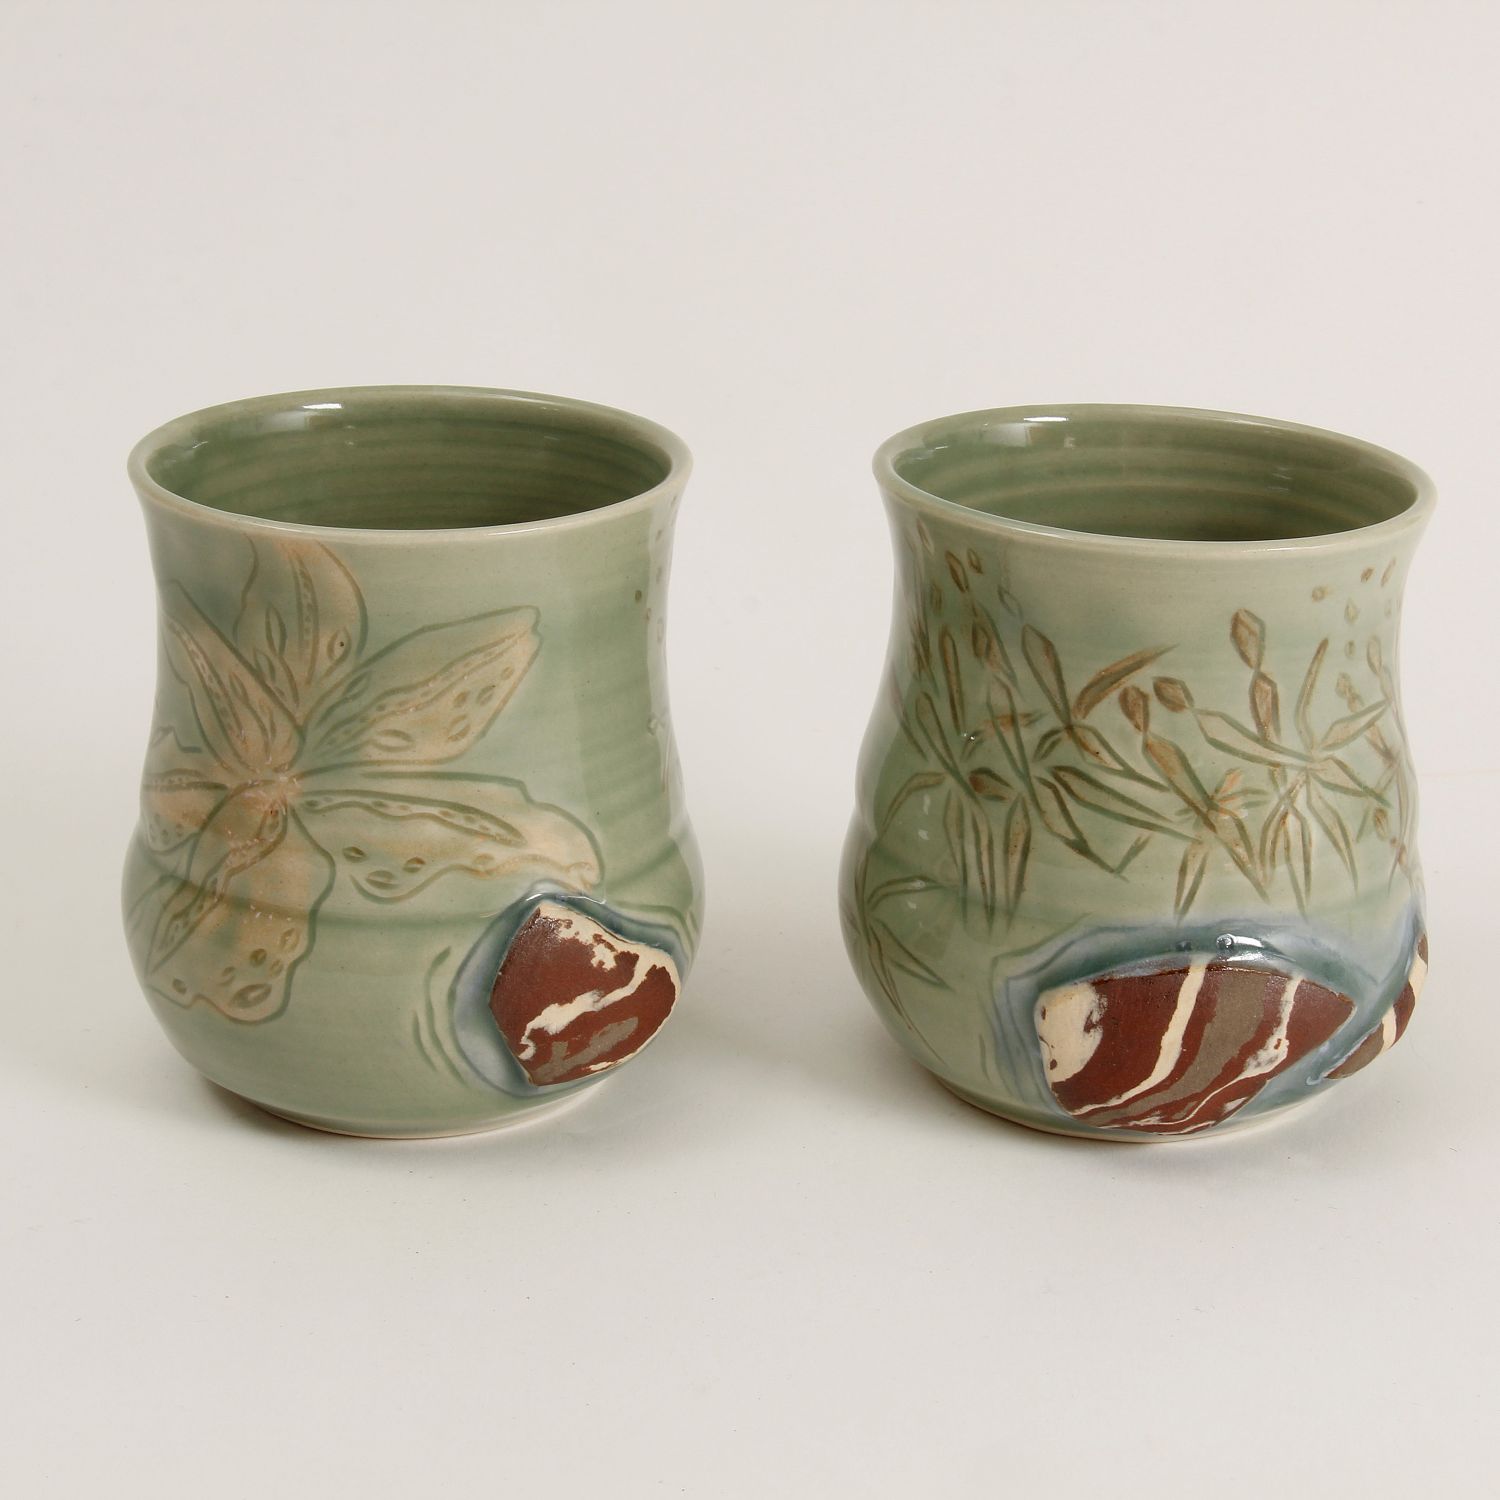 Kristina Rose Studios: Floral Cup (Each sold separately) Product Image 1 of 4